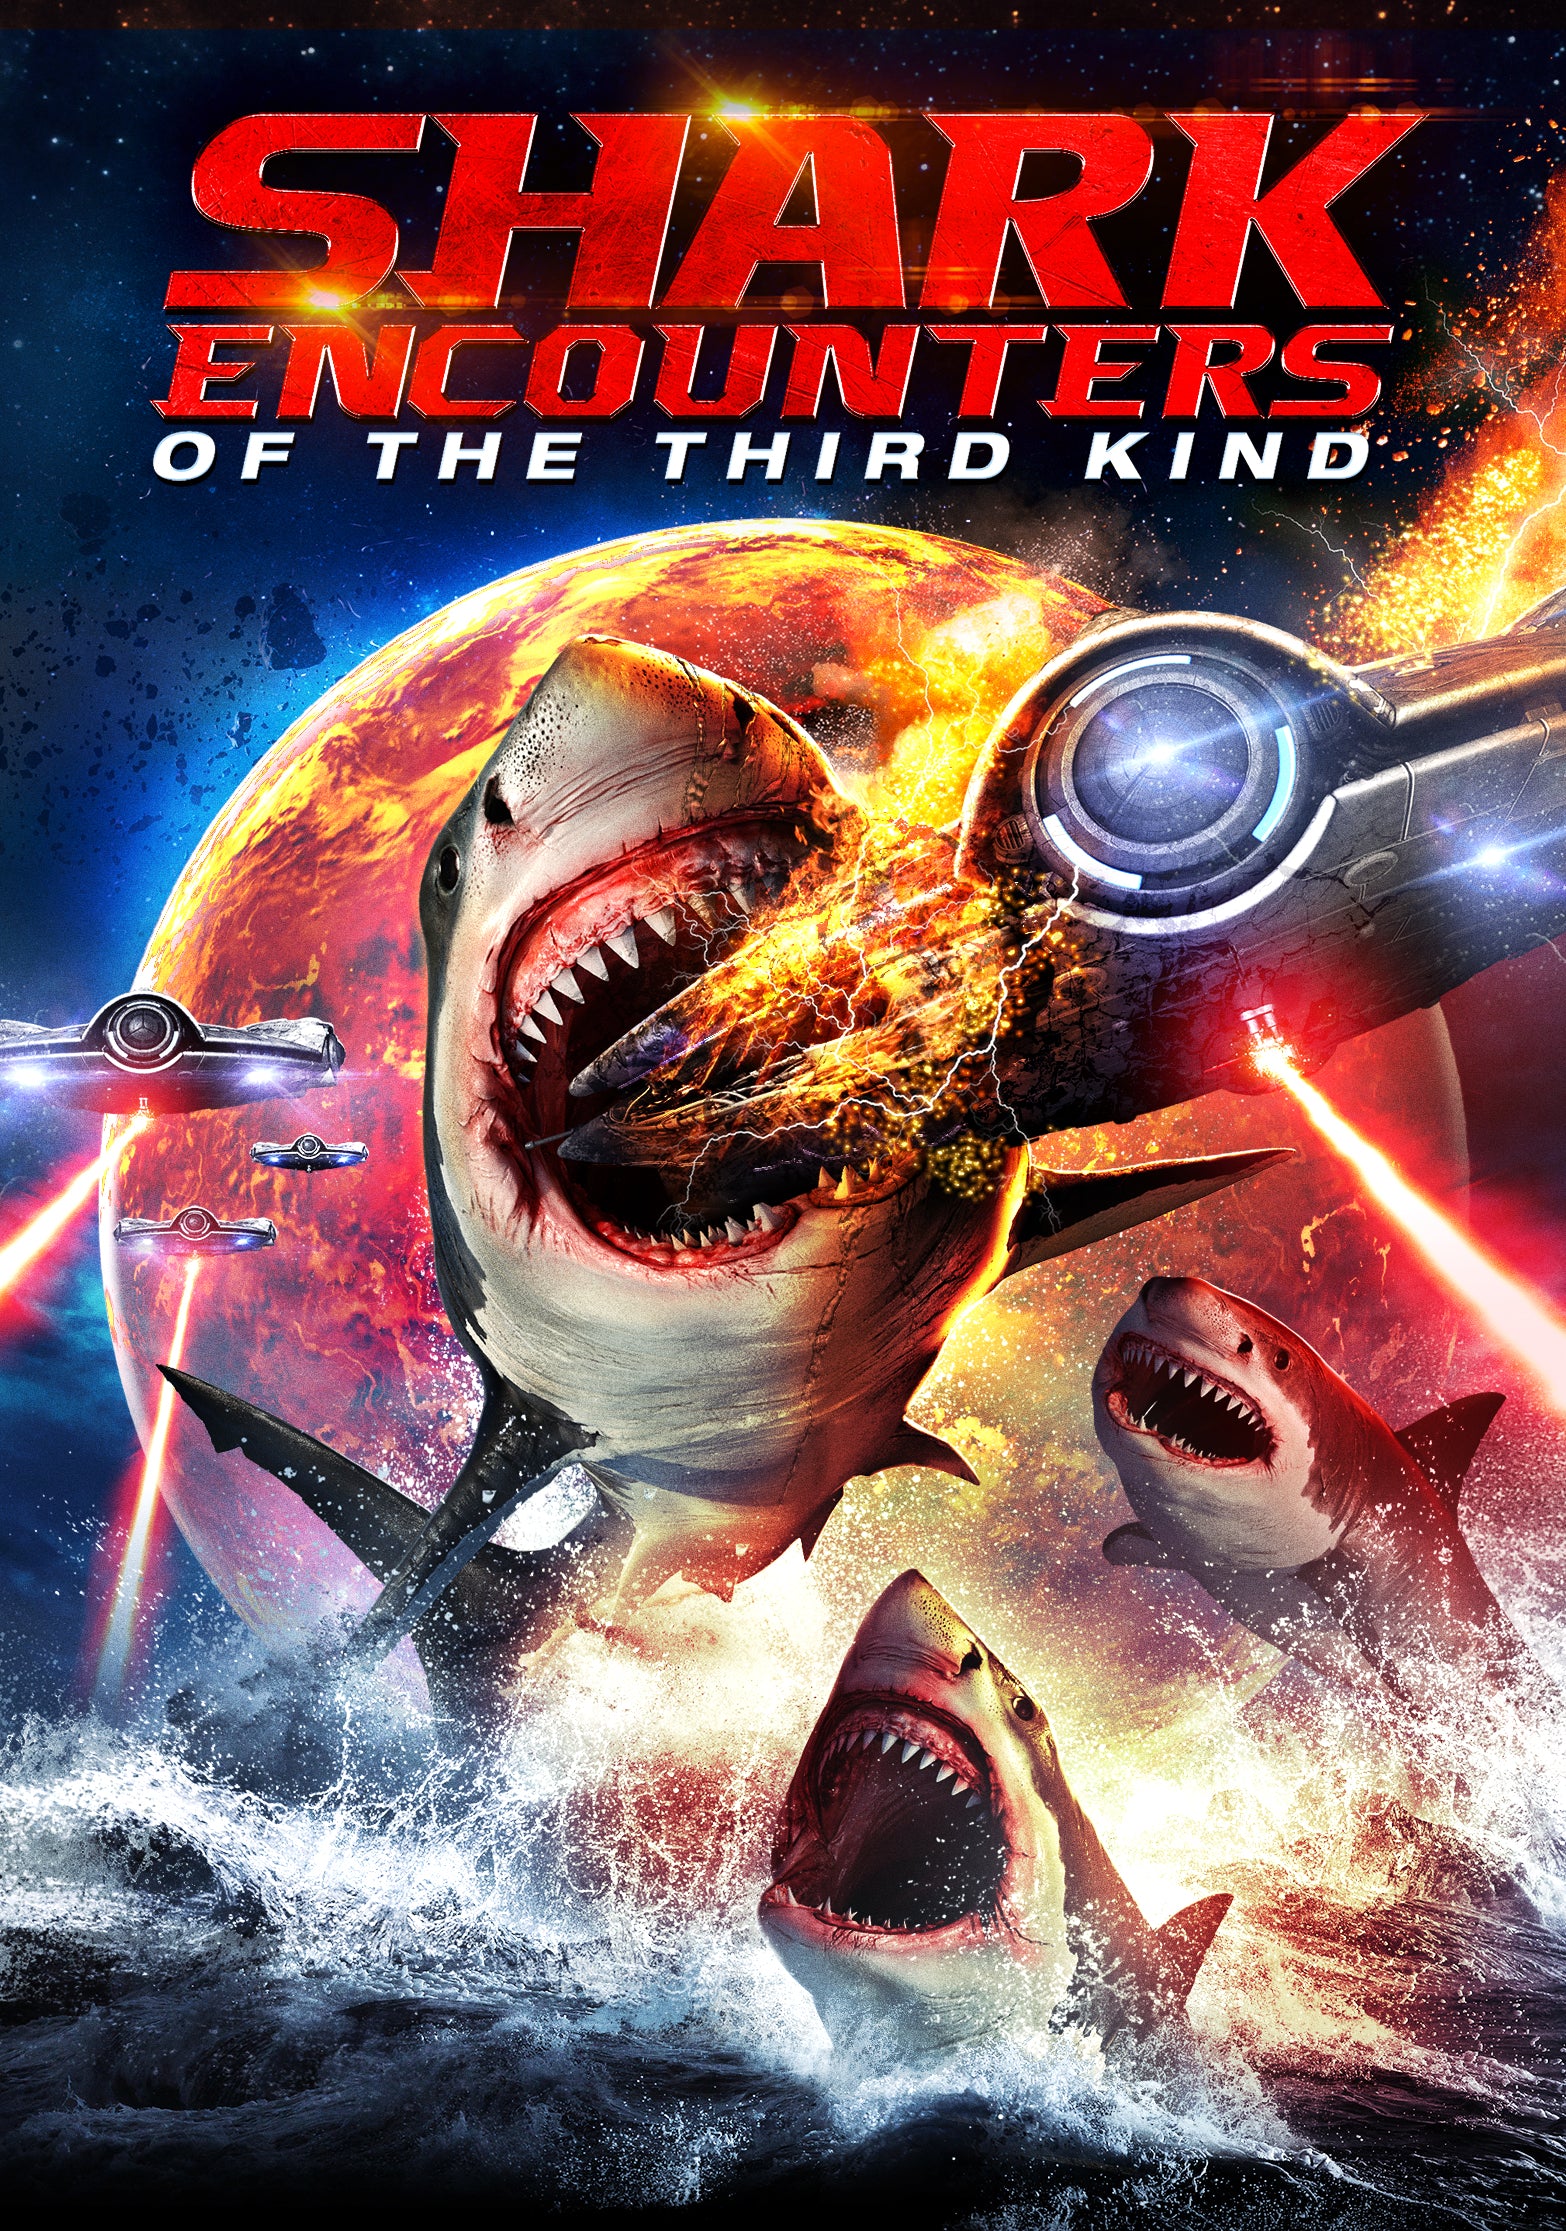 SHARK ENCOUNTERS OF THE THIRD KIND DVD